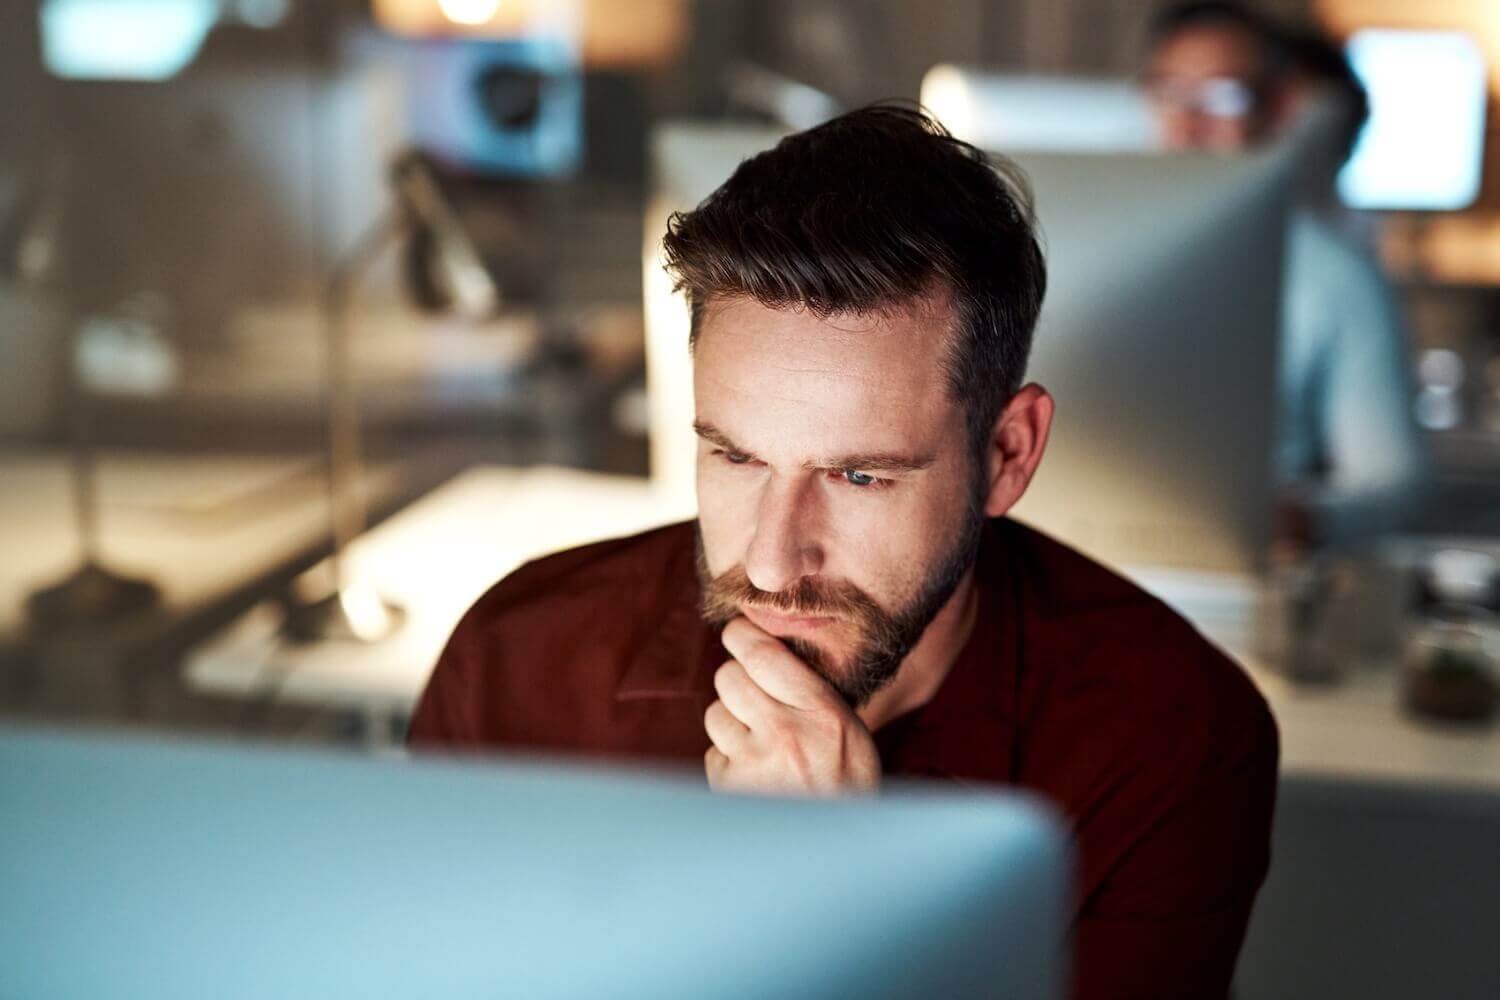 IT Team Member Looking At Computer In Office Using Mailock Automated Email Encryption